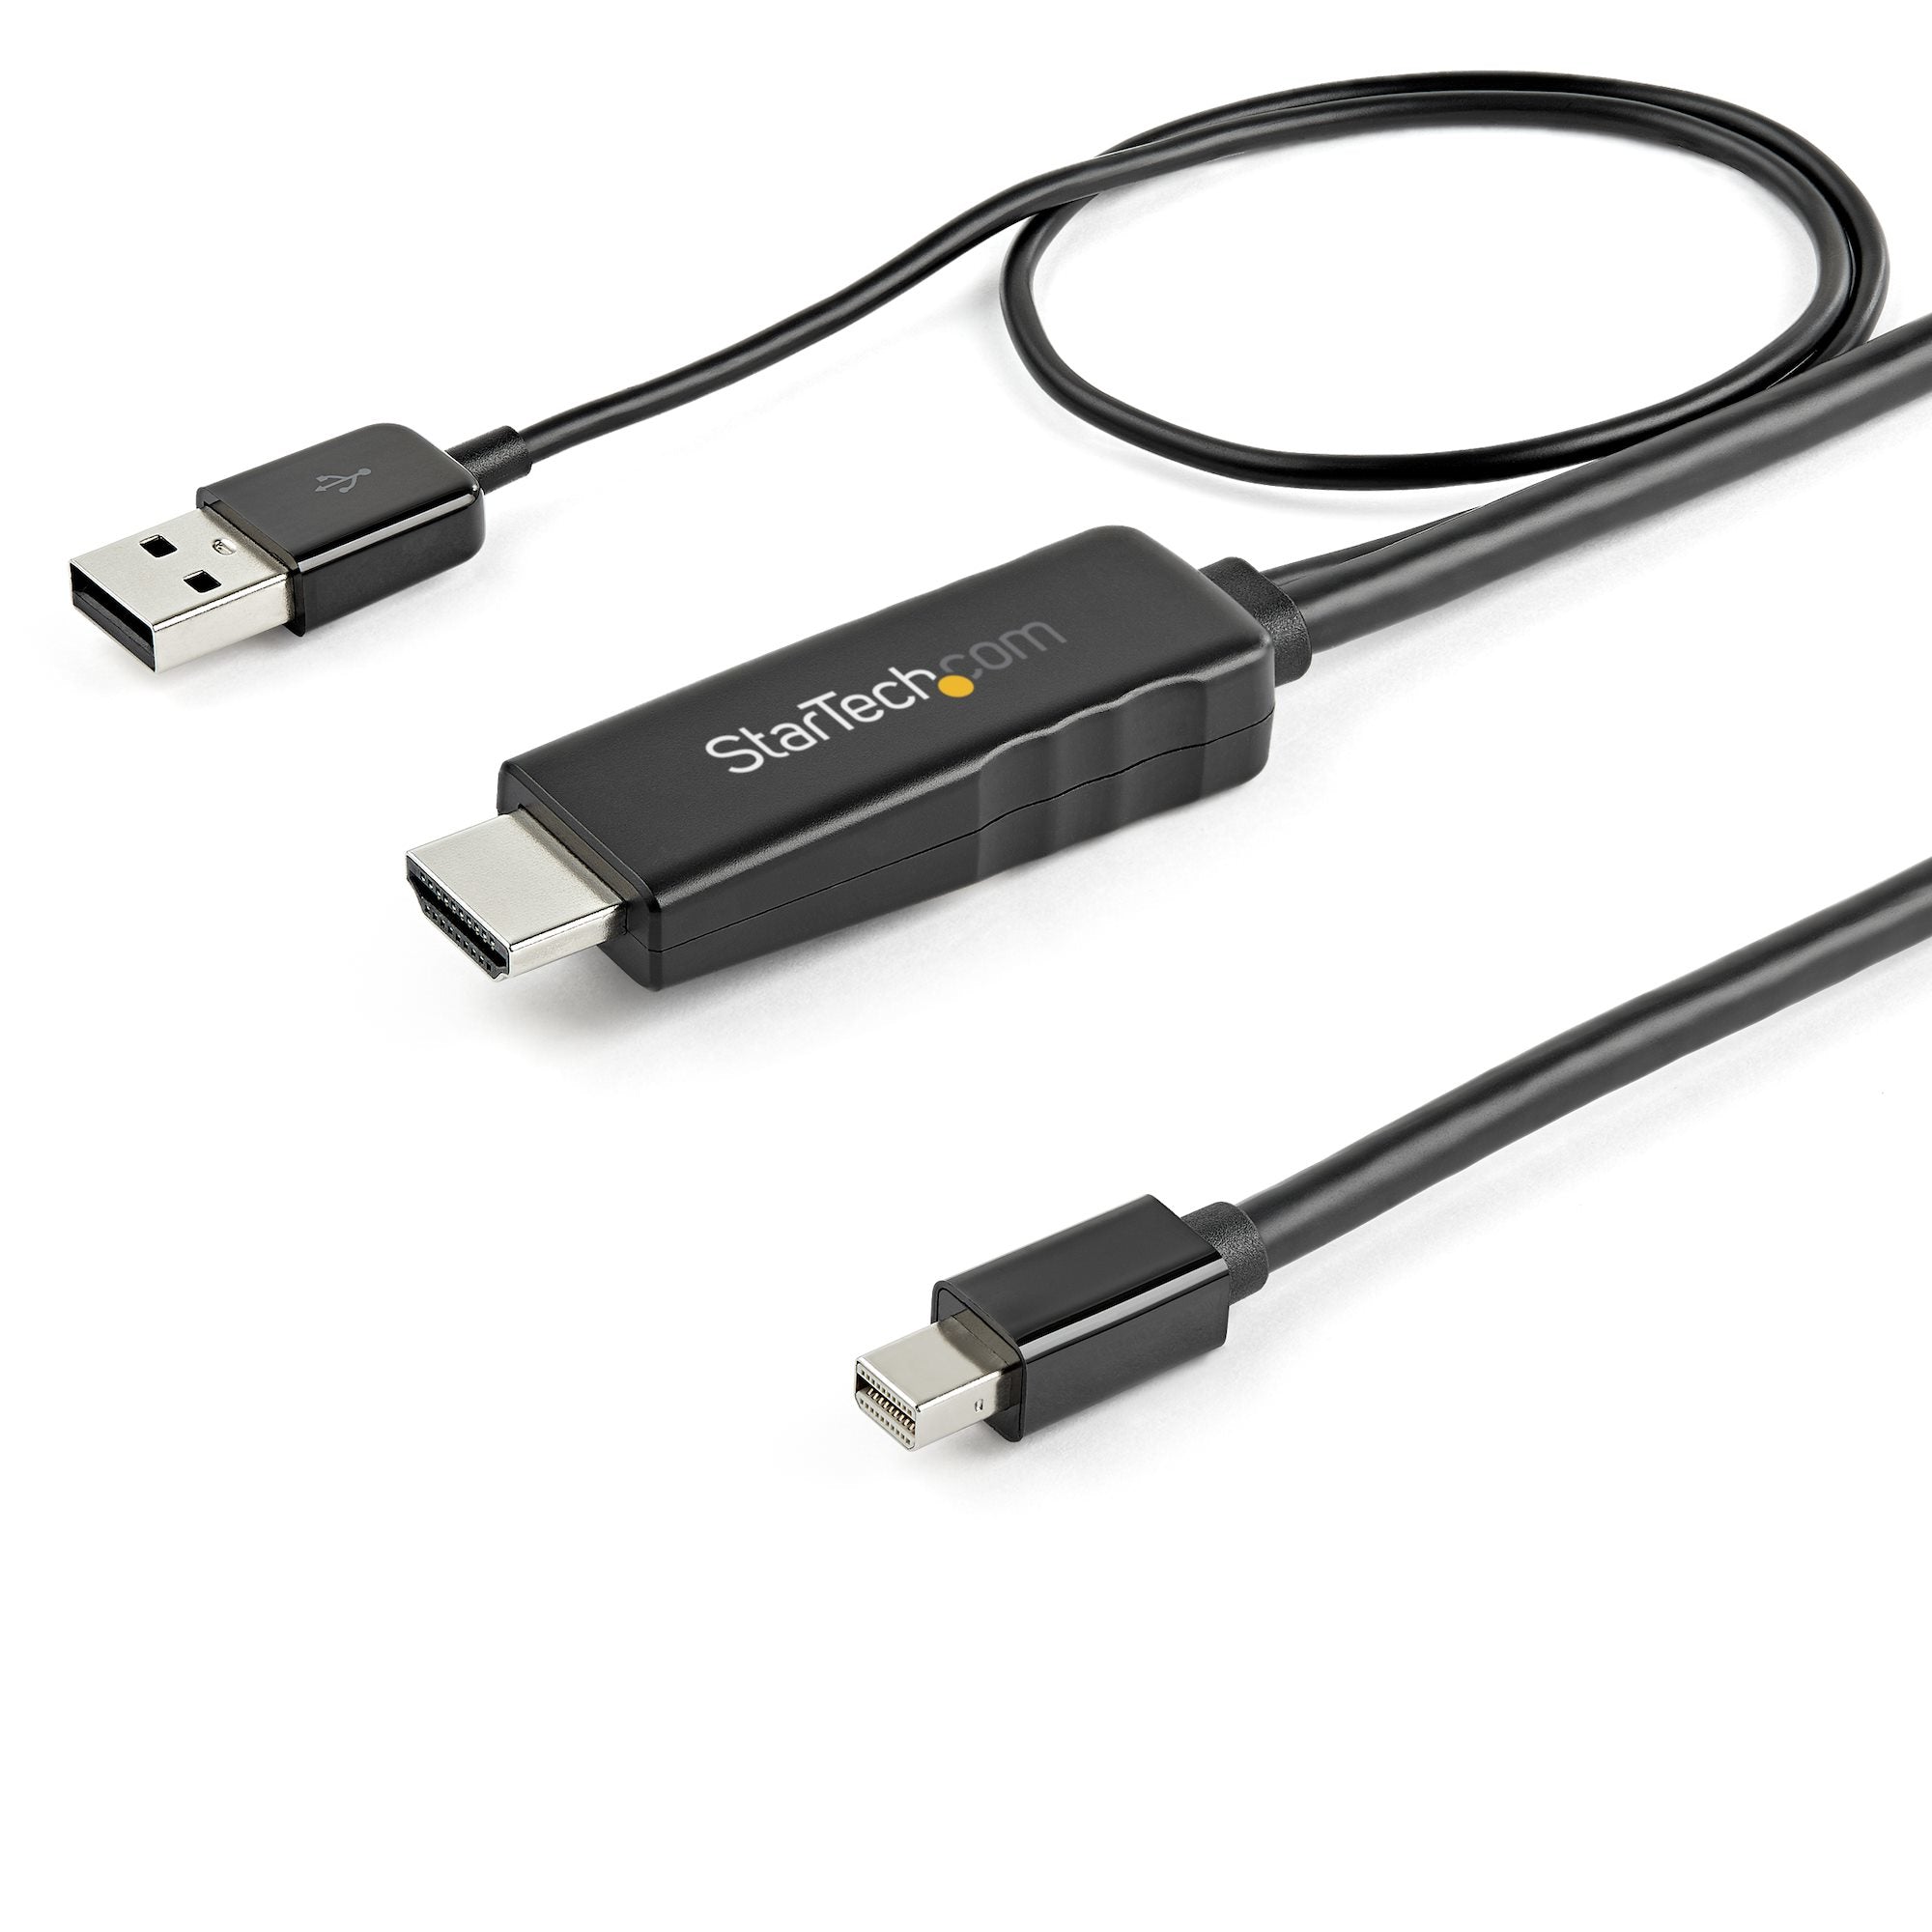 StarTech.com 6ft (2m) HDMI to Mini DisplayPort Cable 4K 30Hz - Active HDMI to mDP Adapter Converter Cable with Audio - USB Powered - Mac & Windows - Male to Male Video Adapter Cable